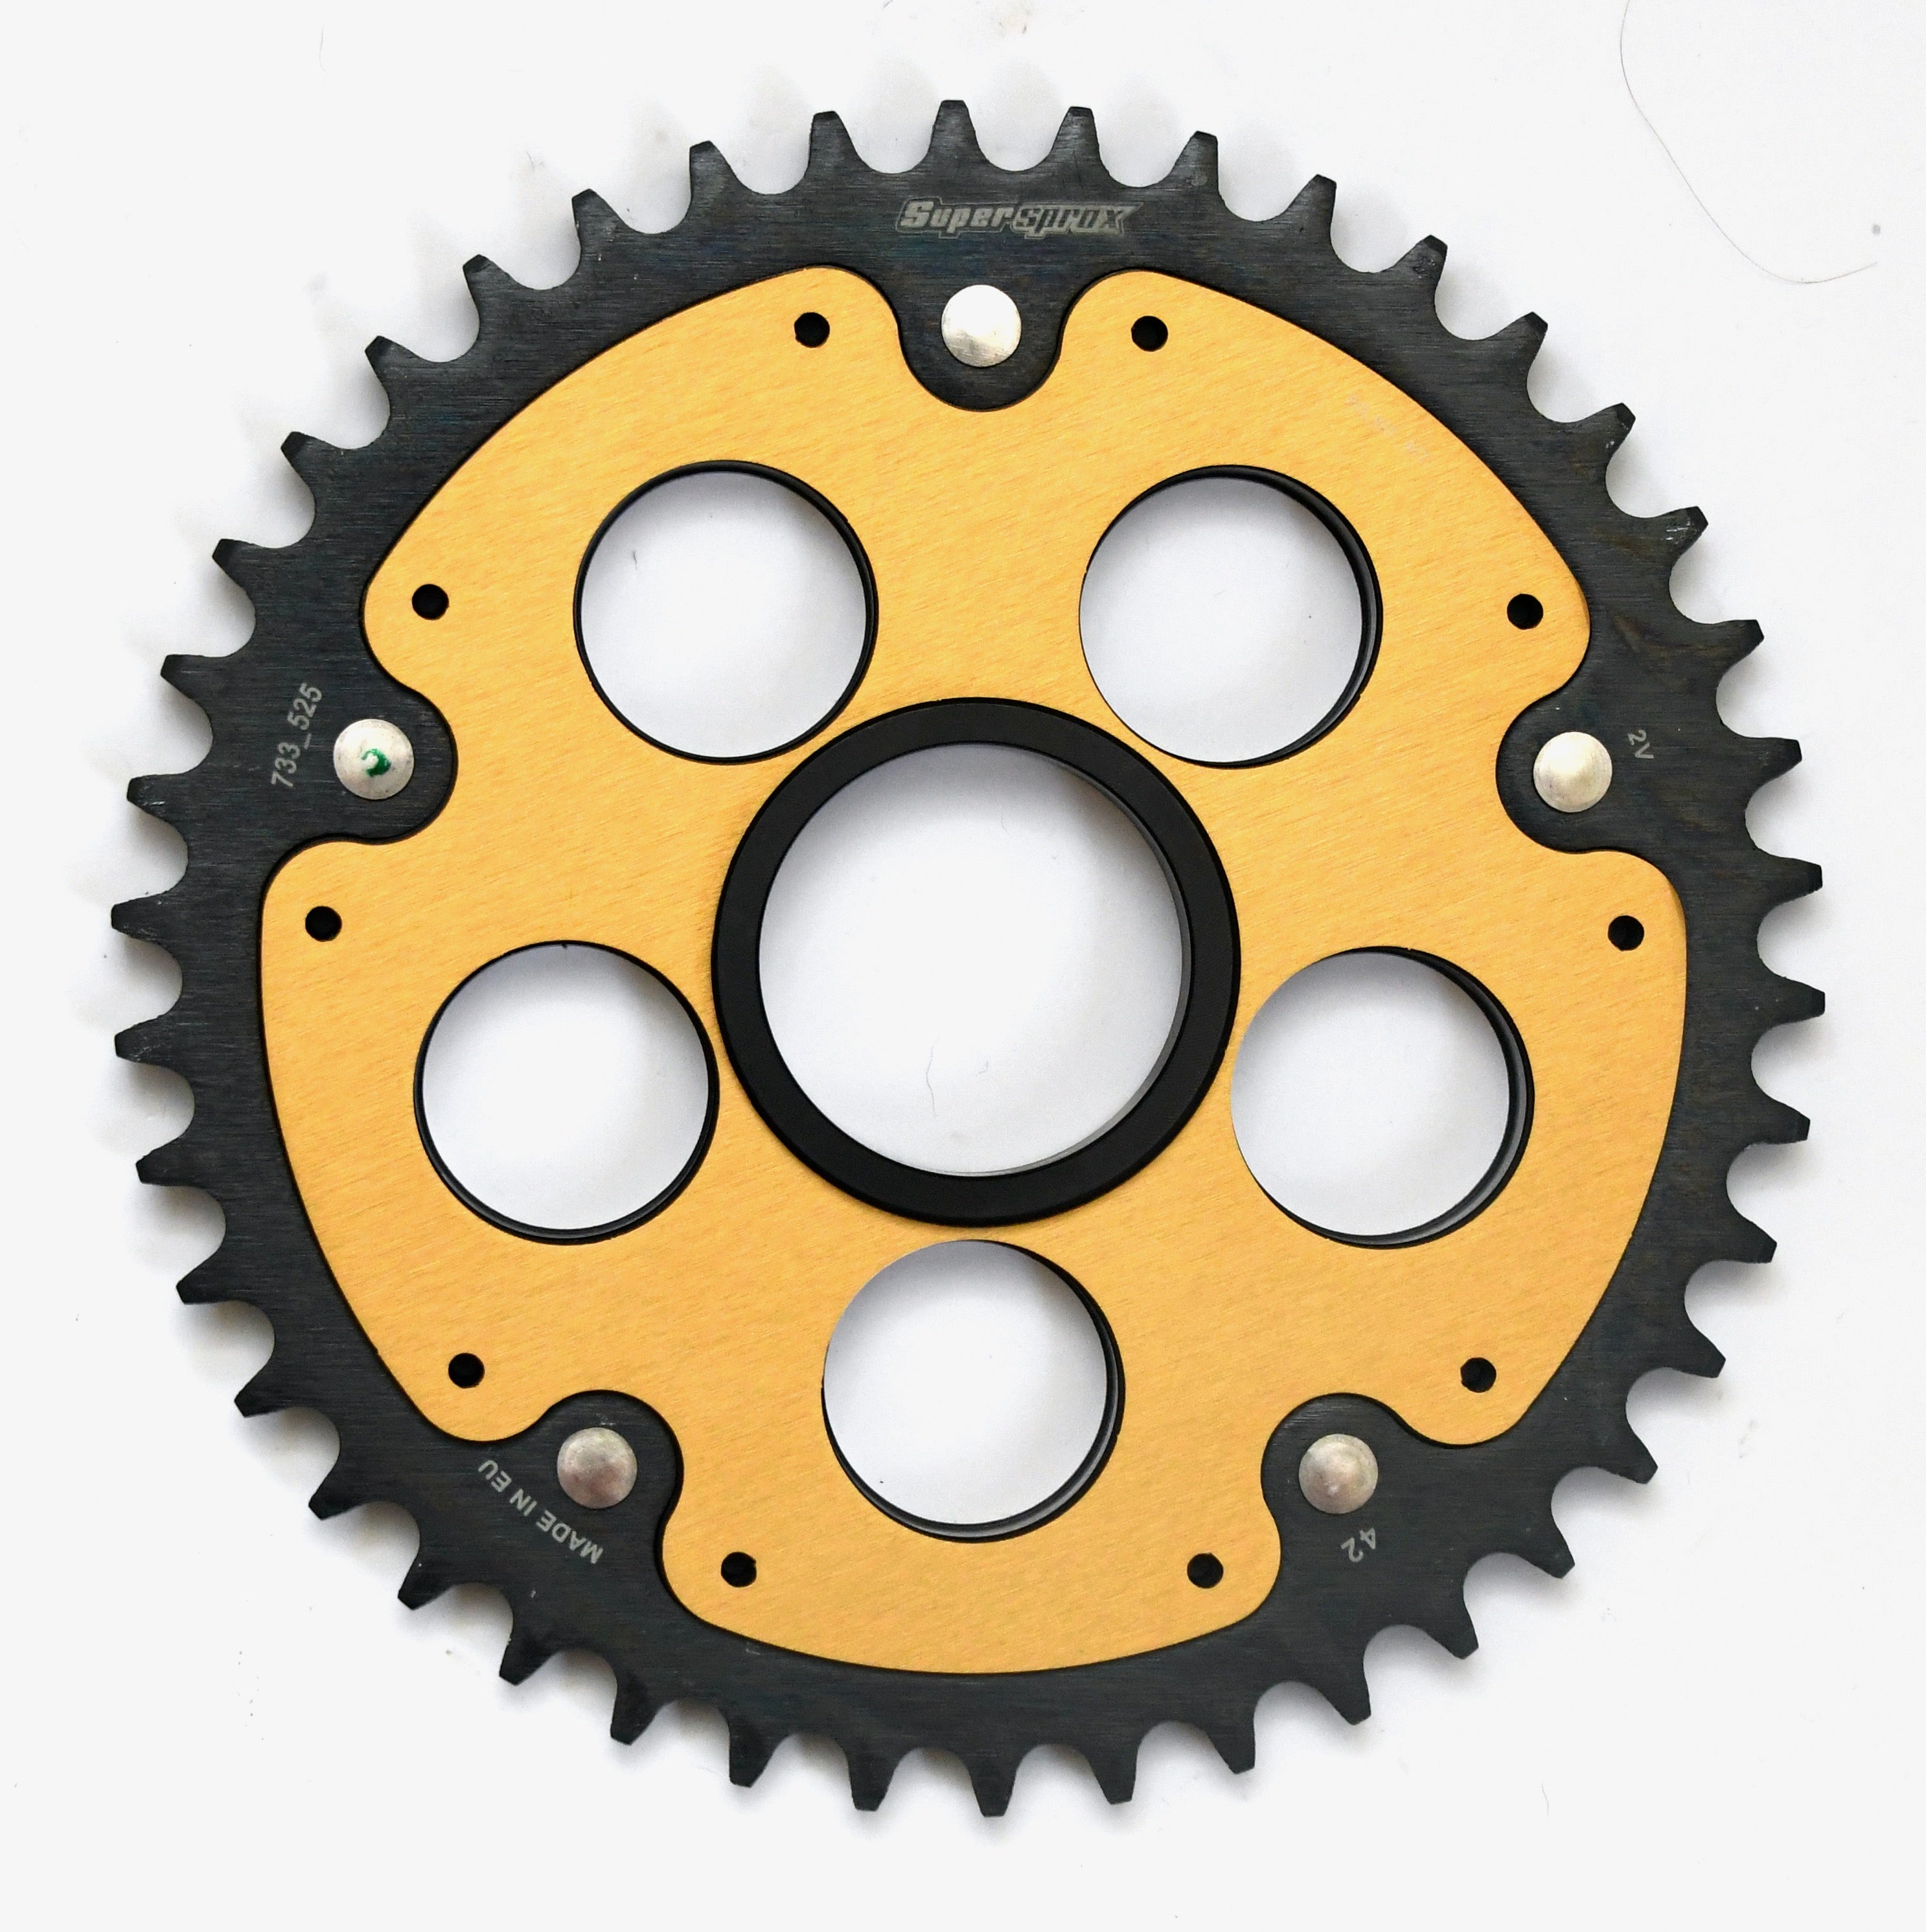 Supersprox Edge Stealth Rear Sprocket RSA-733_525 - Choose Your Gearing - 0